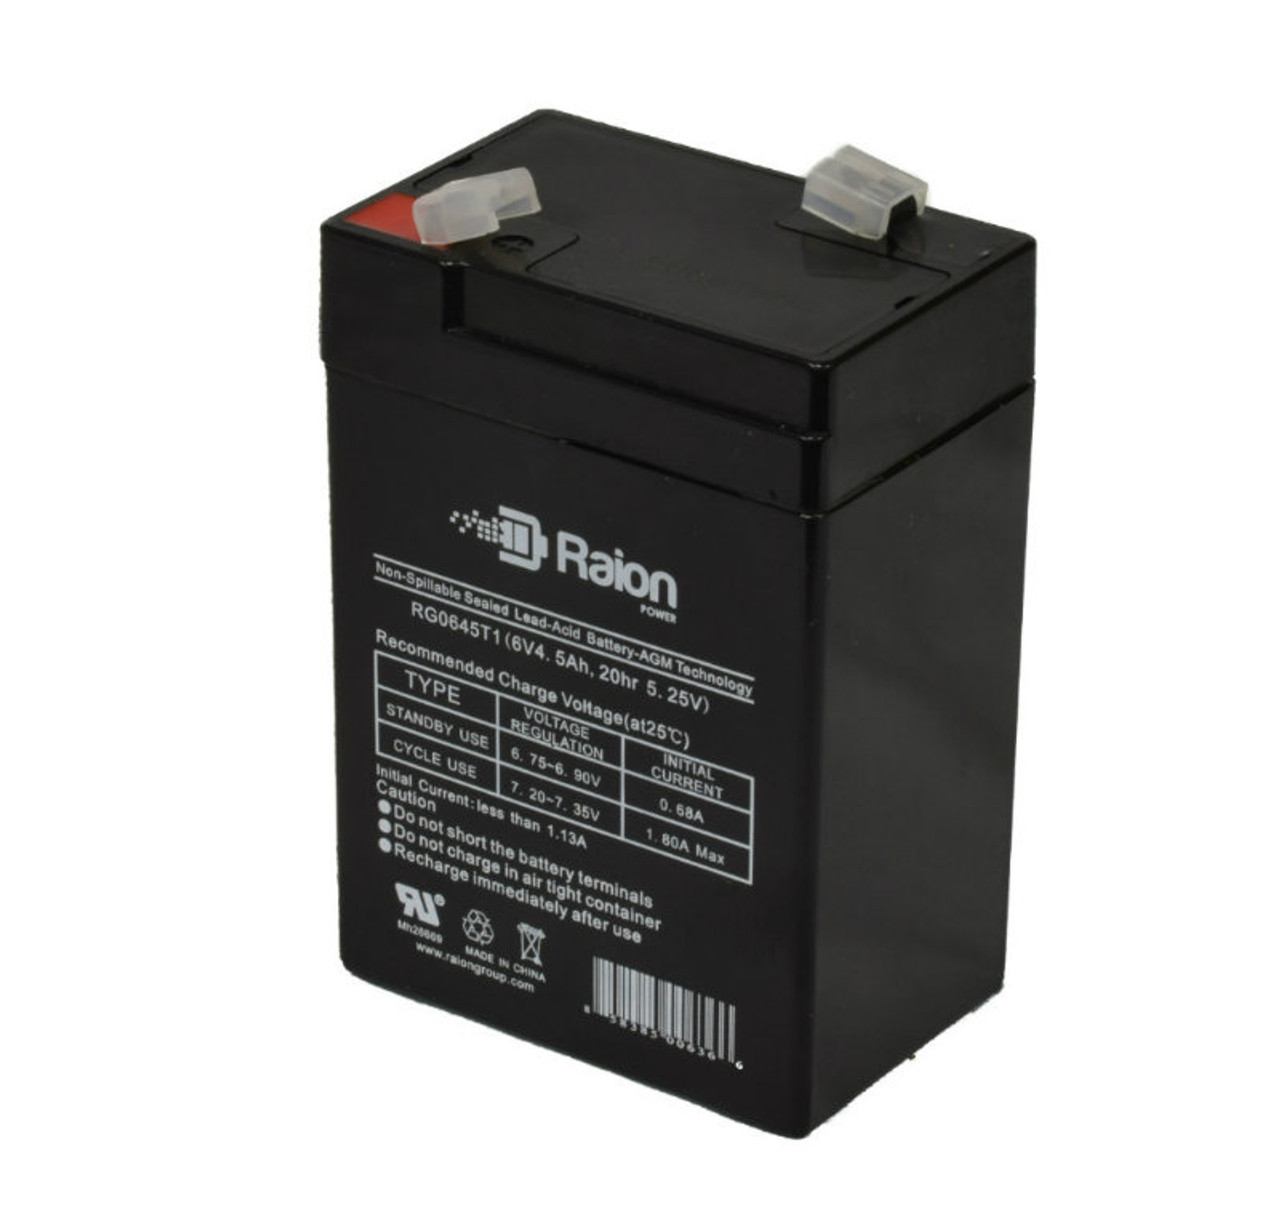 Raion Power RG0645T1 6V 4.5Ah Replacement Battery Cartridge for Ademco 418O